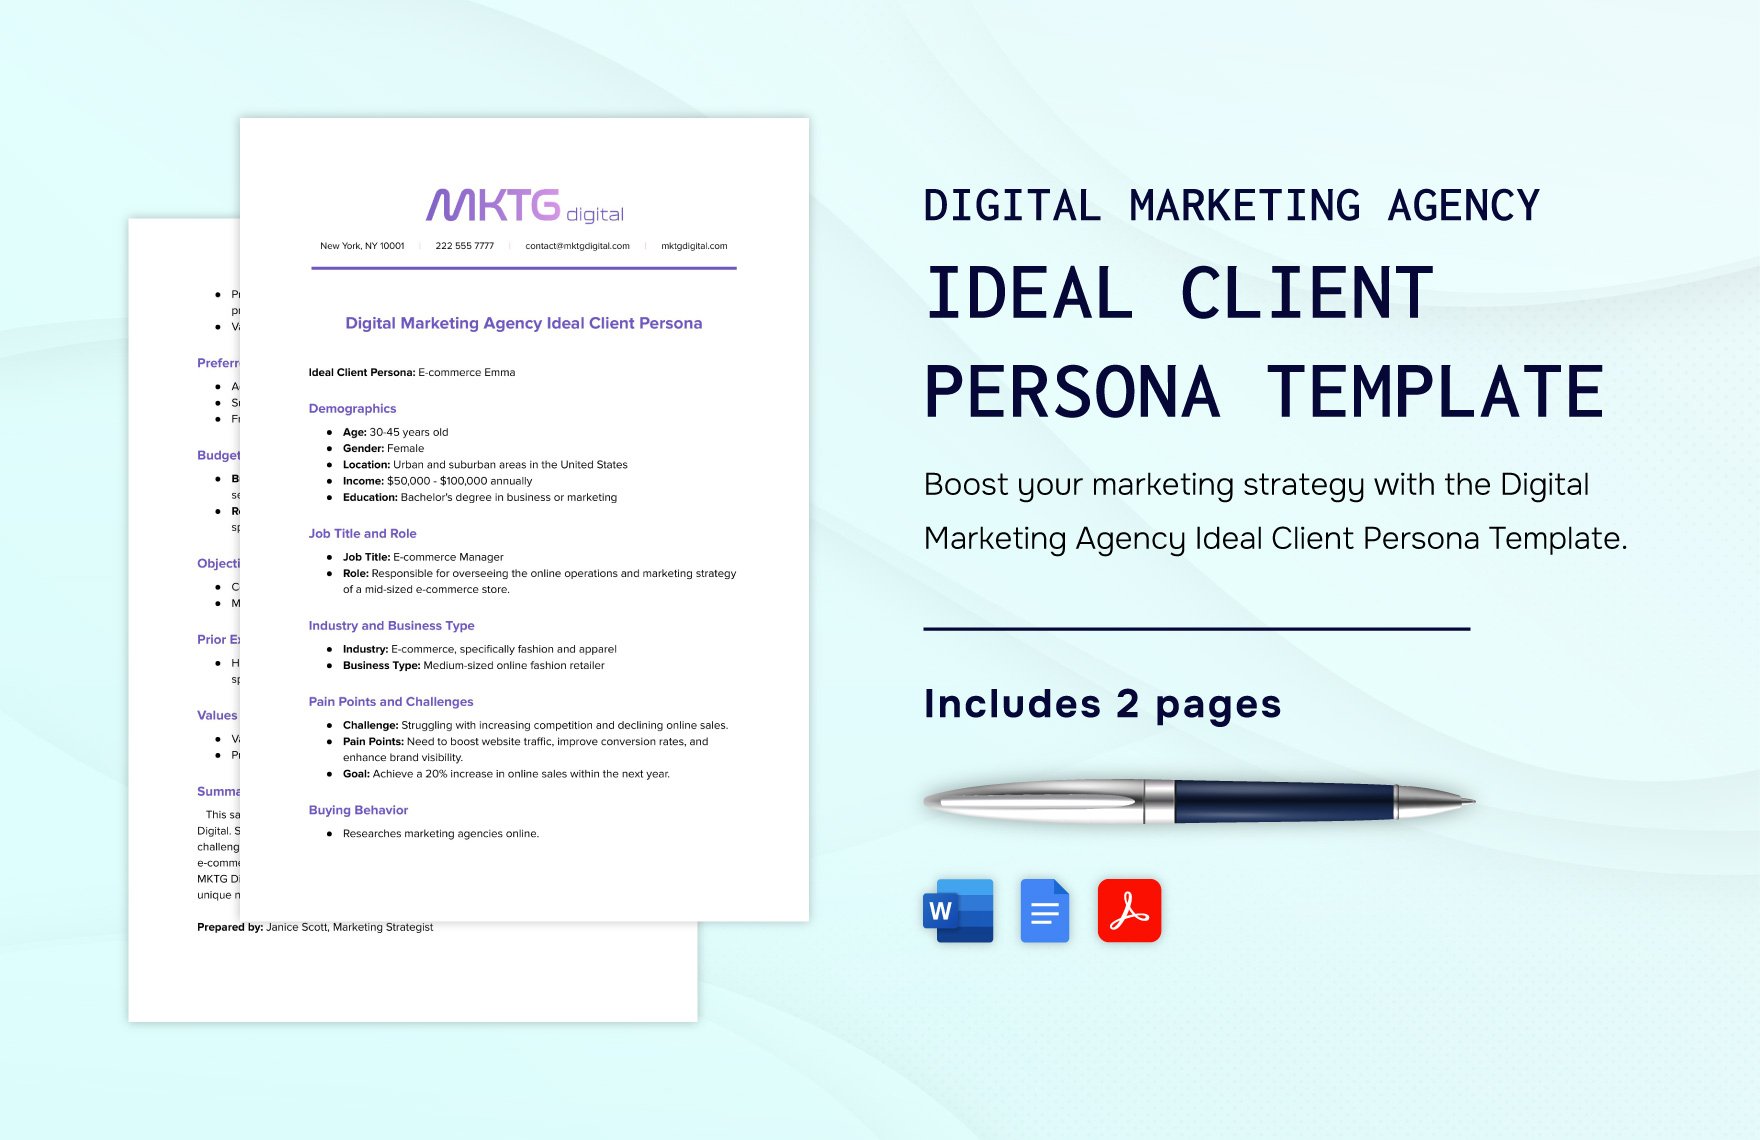 Digital Marketing Agency Ideal Client Persona Template